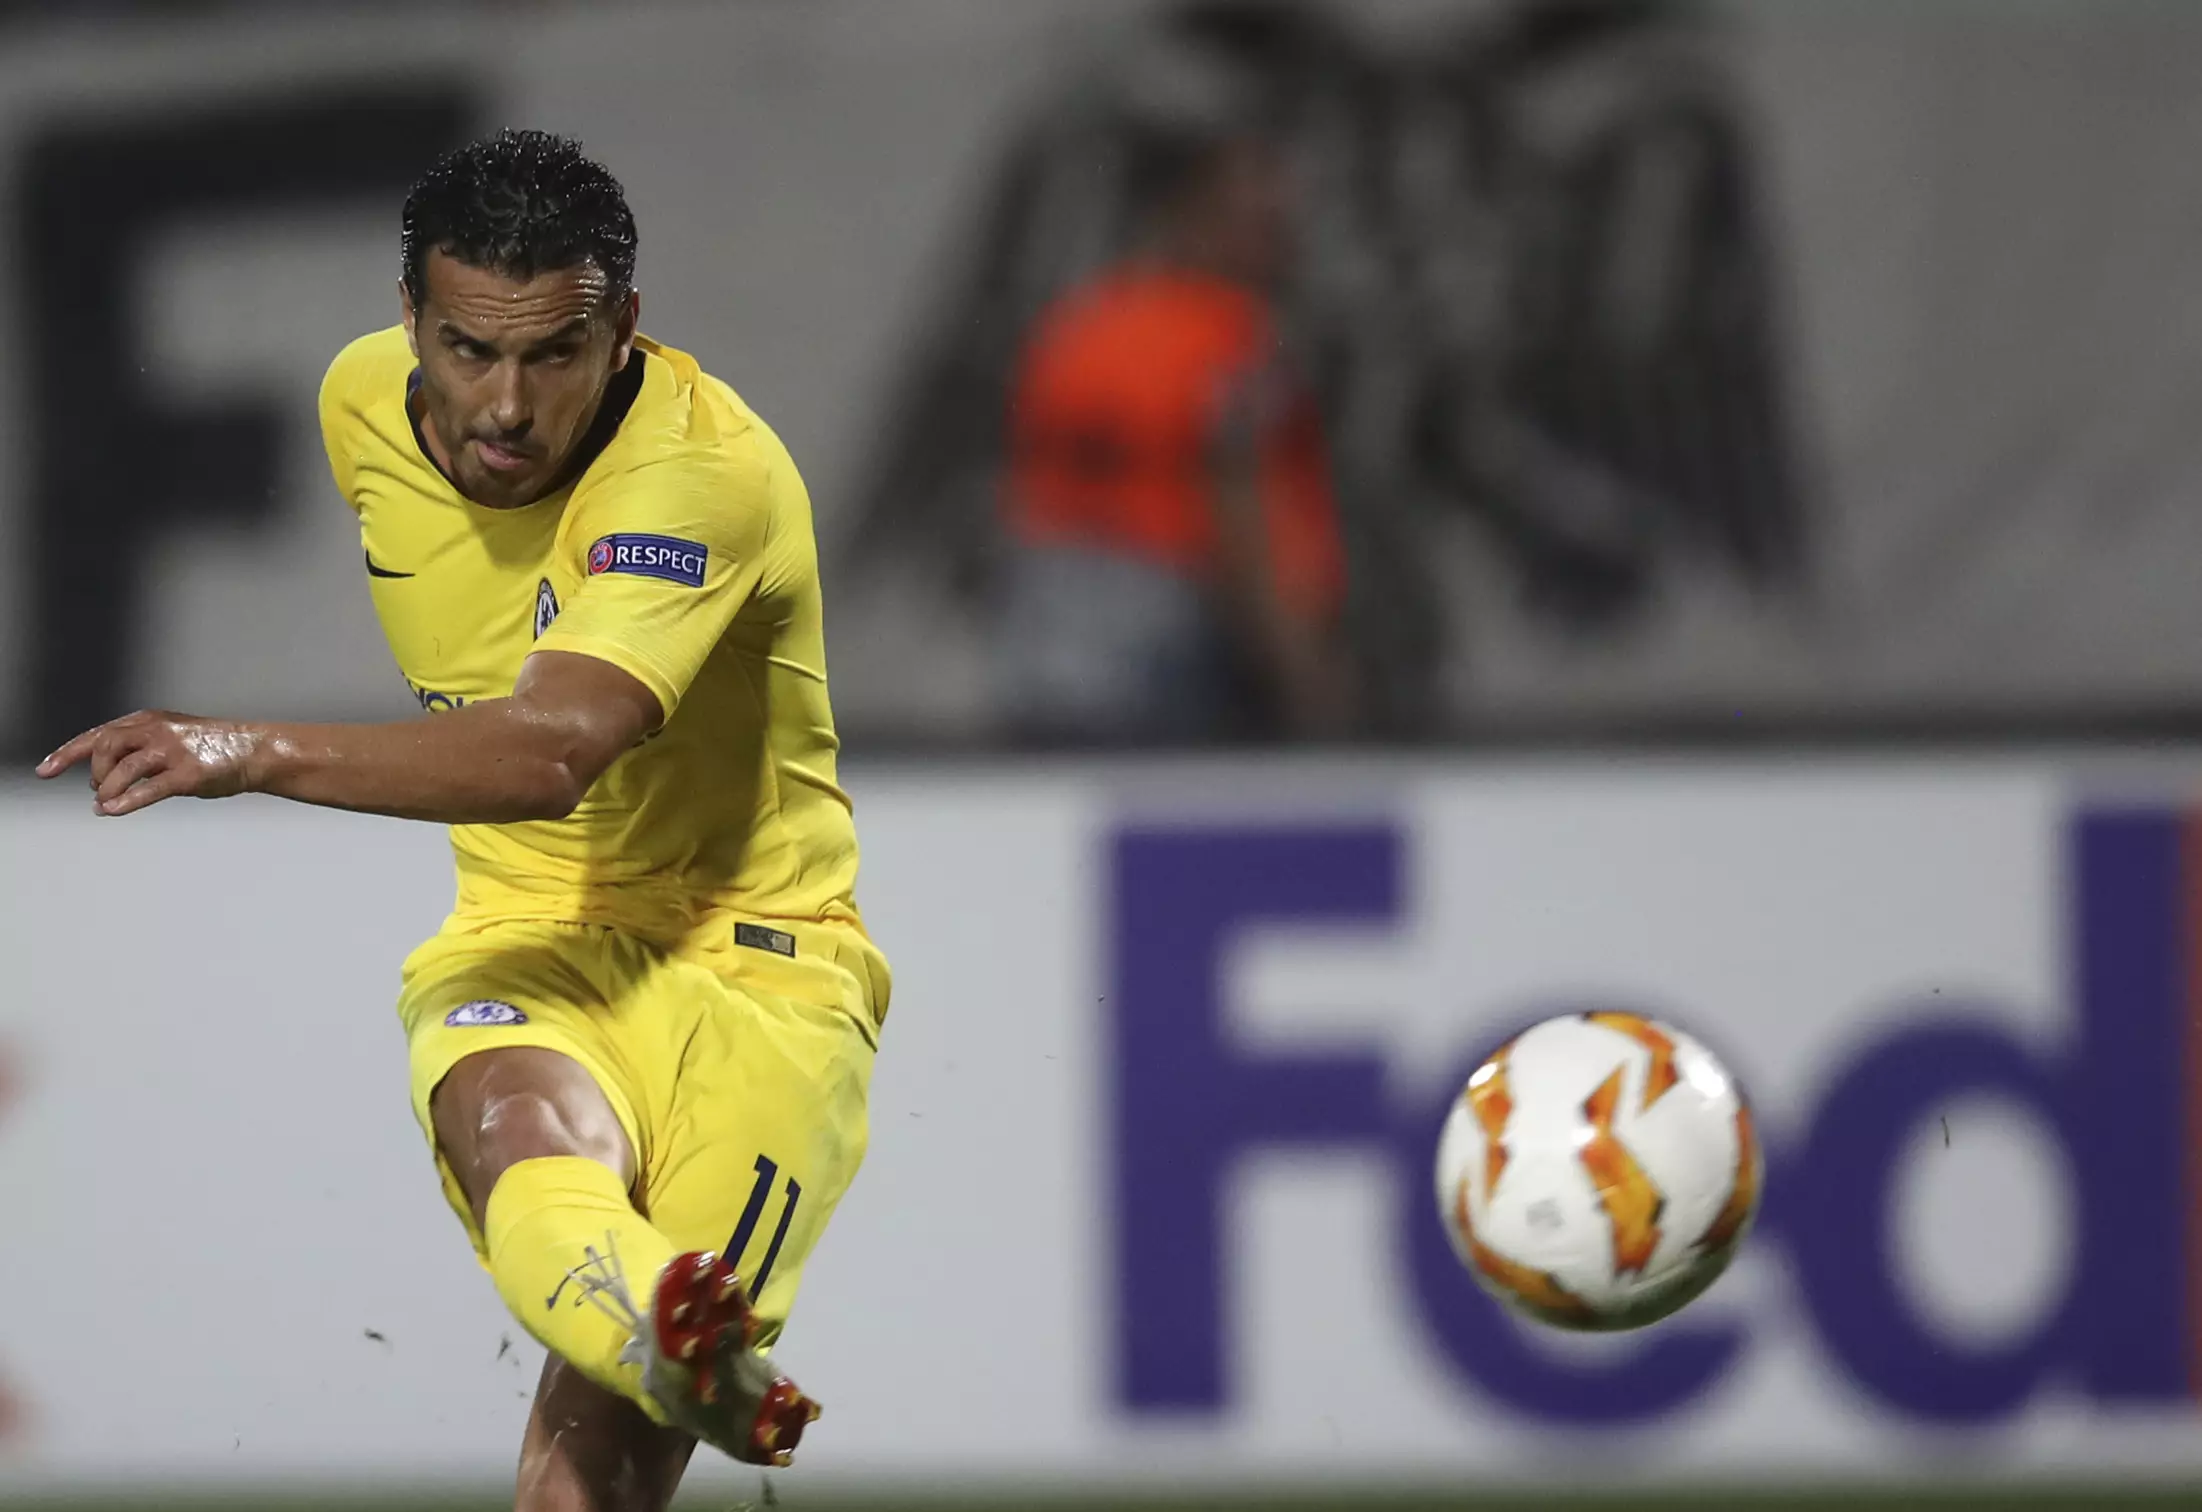 Pedro In Action Against PAOK